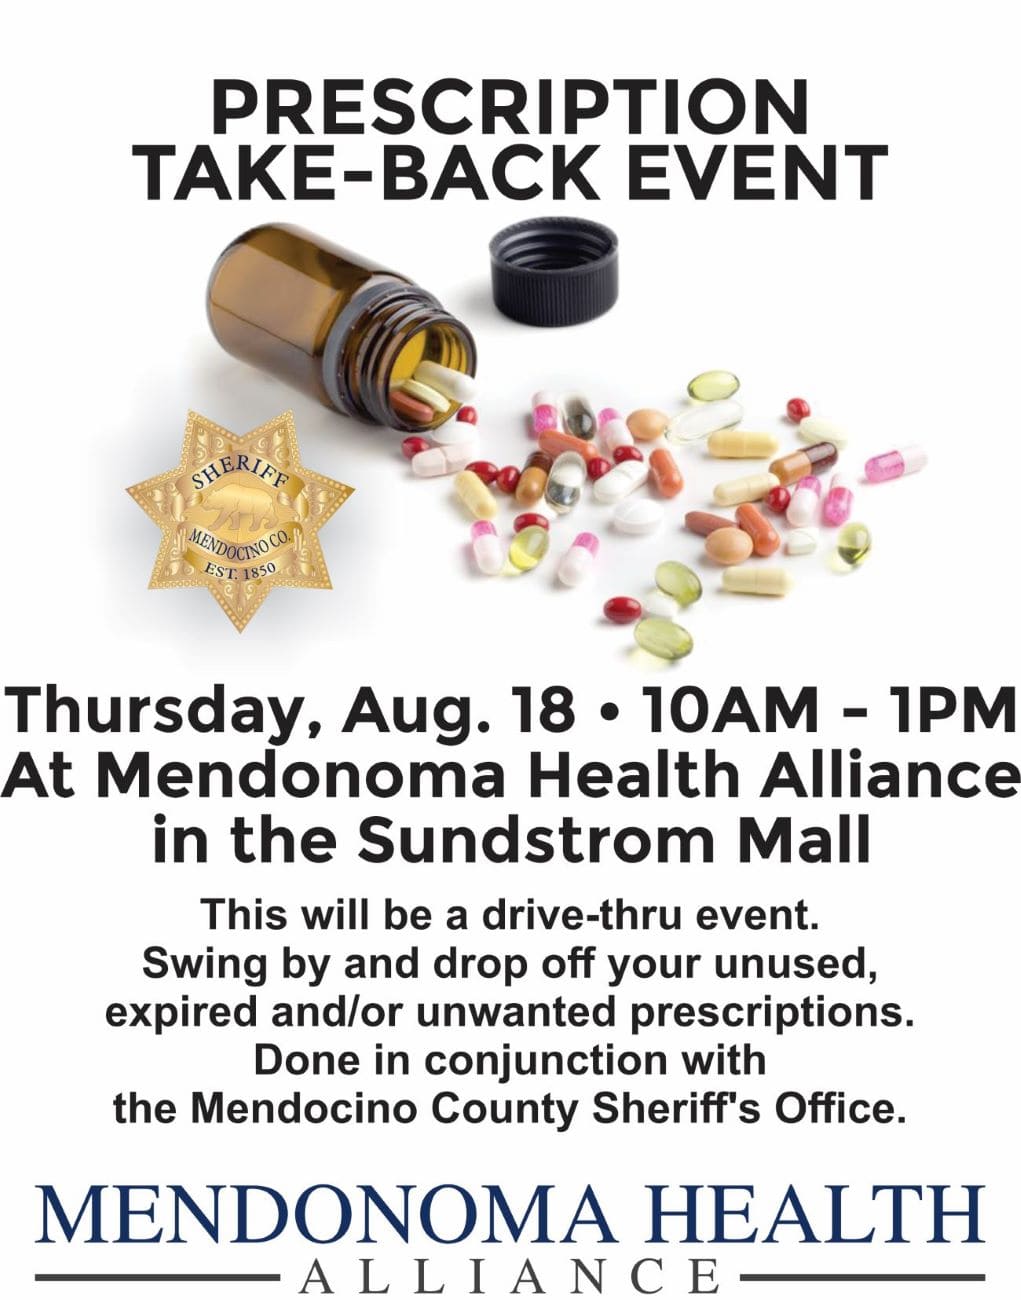 Prescription Take-Back event flyer, showing a spilled prescription bottle of pills, for Mendonoma Health Alliance August 18th event at Sundstrom Mall in Gualala.